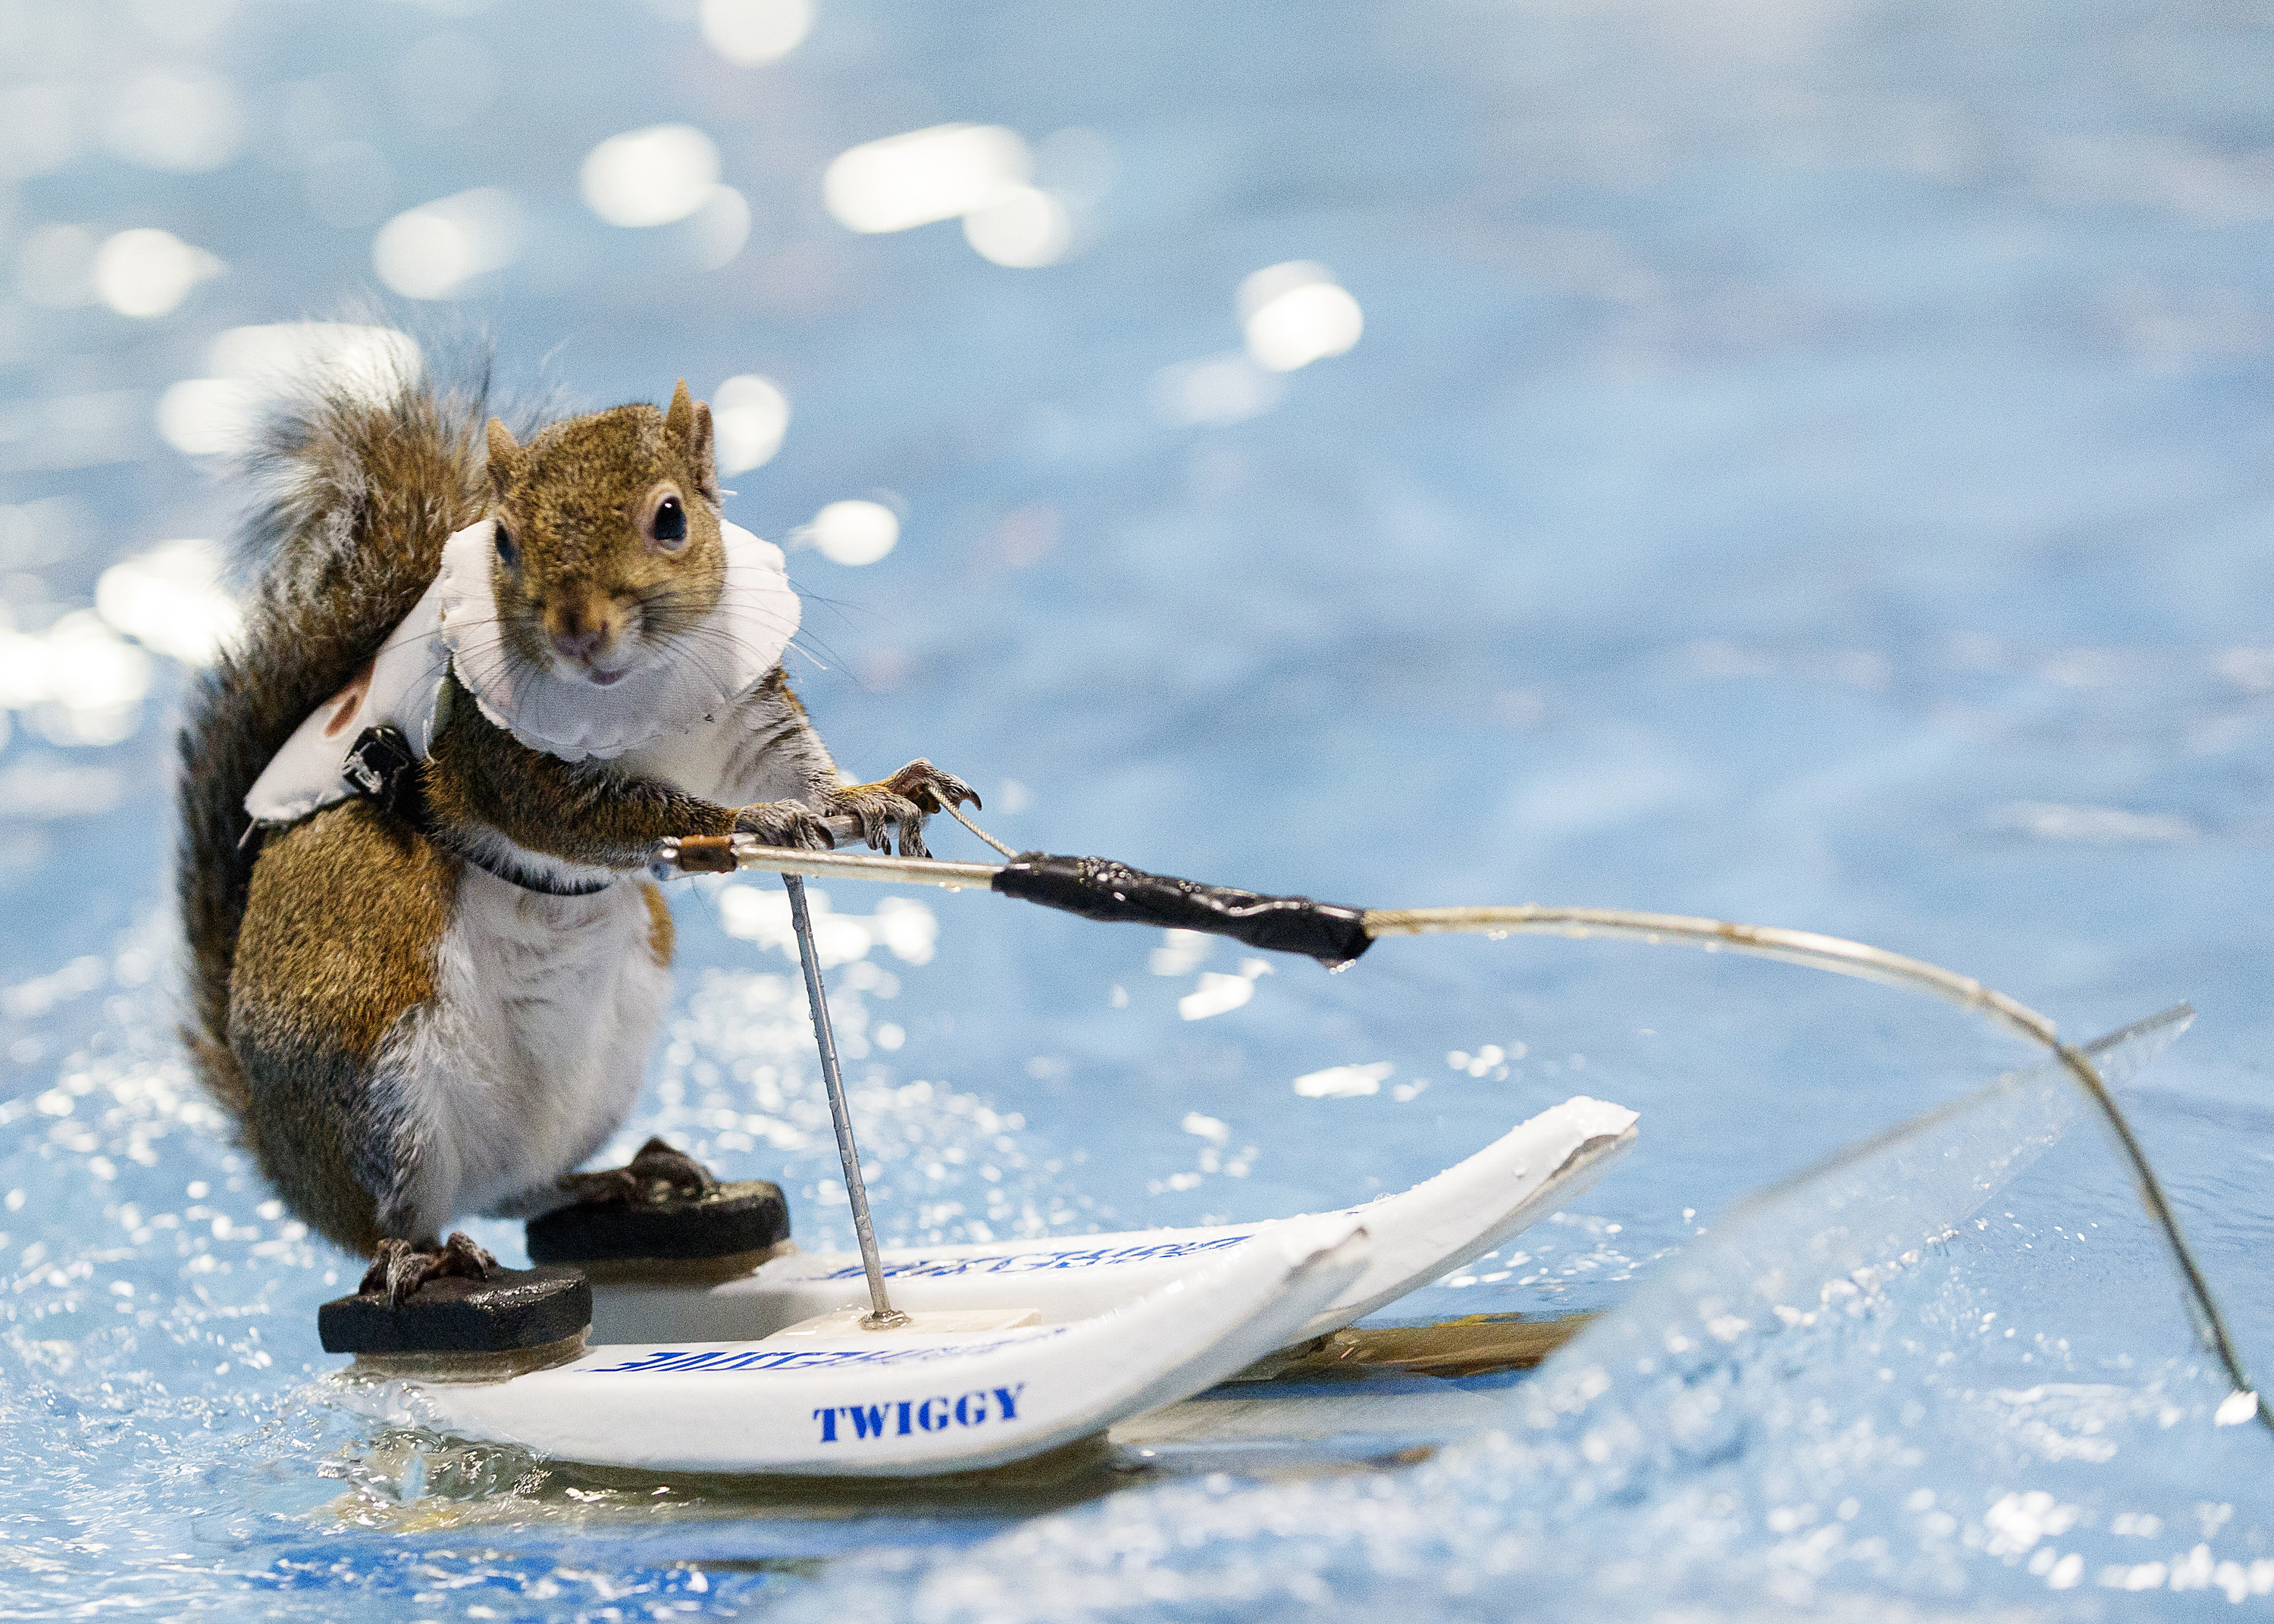 Twiggy the Squirrel wearing a safety suit water-skiing on water, on water skis that have his name written on them.